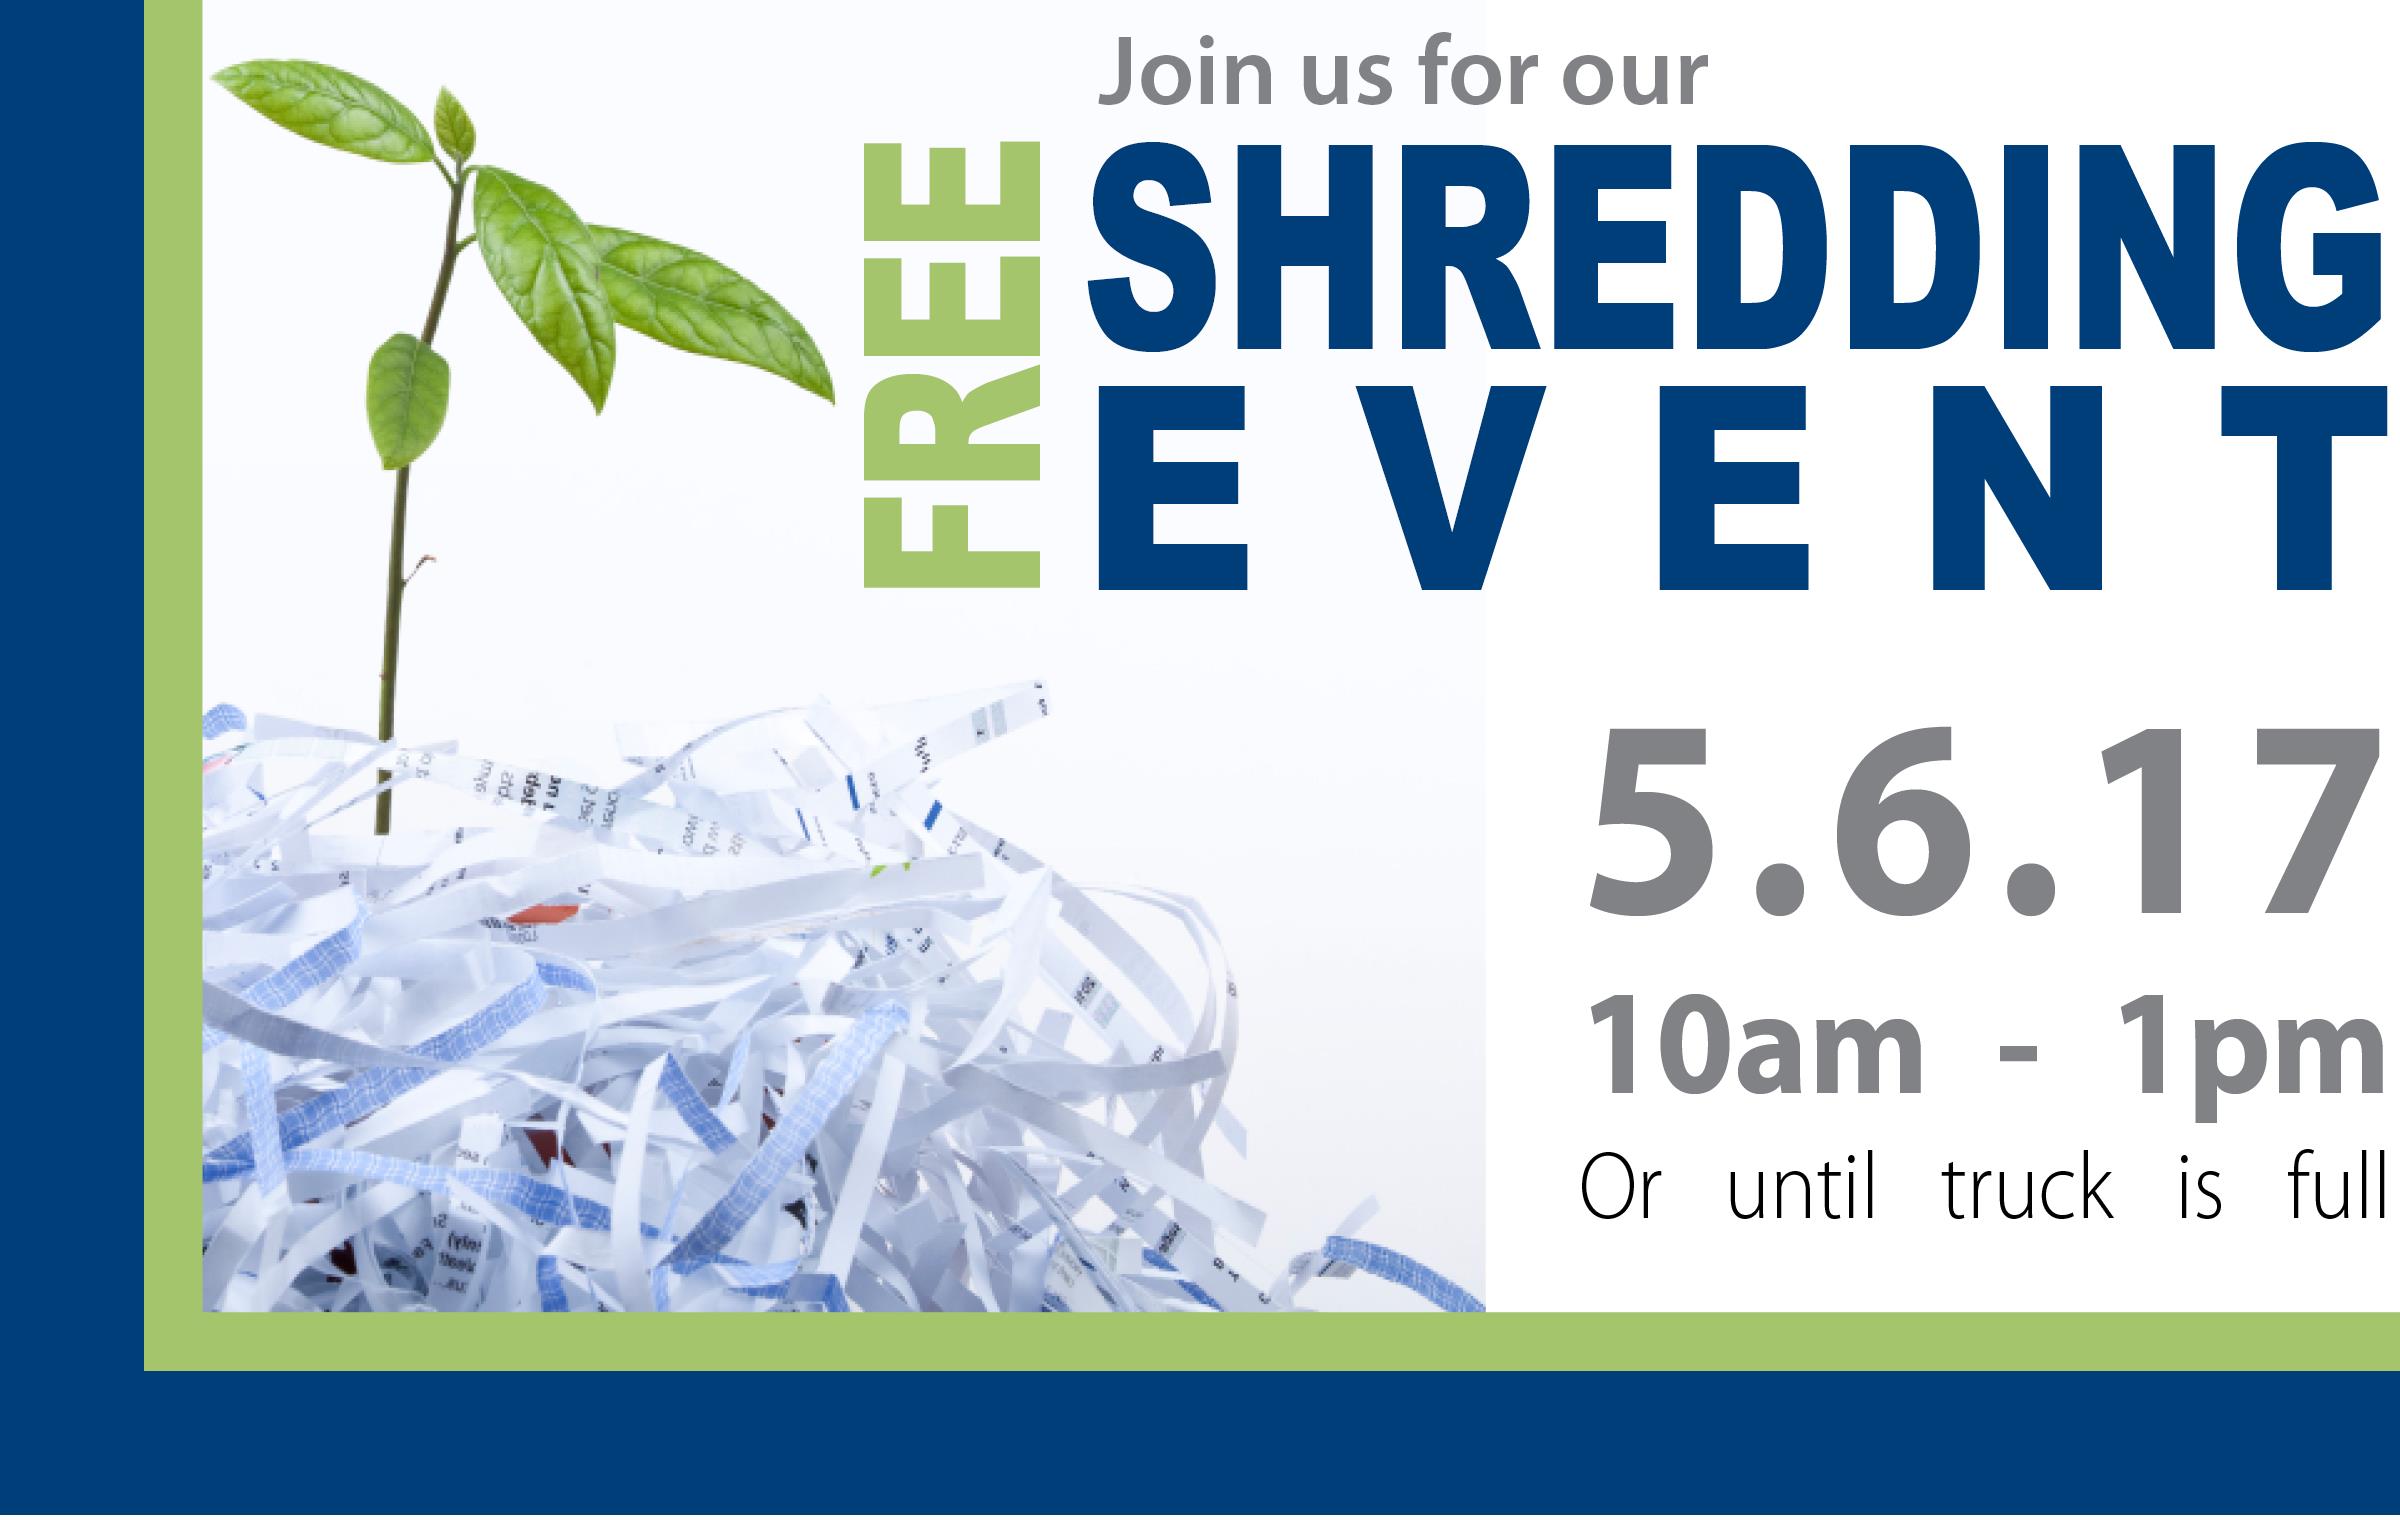 For-Constant-Contact-_-Shredding-Event_2017.jpg